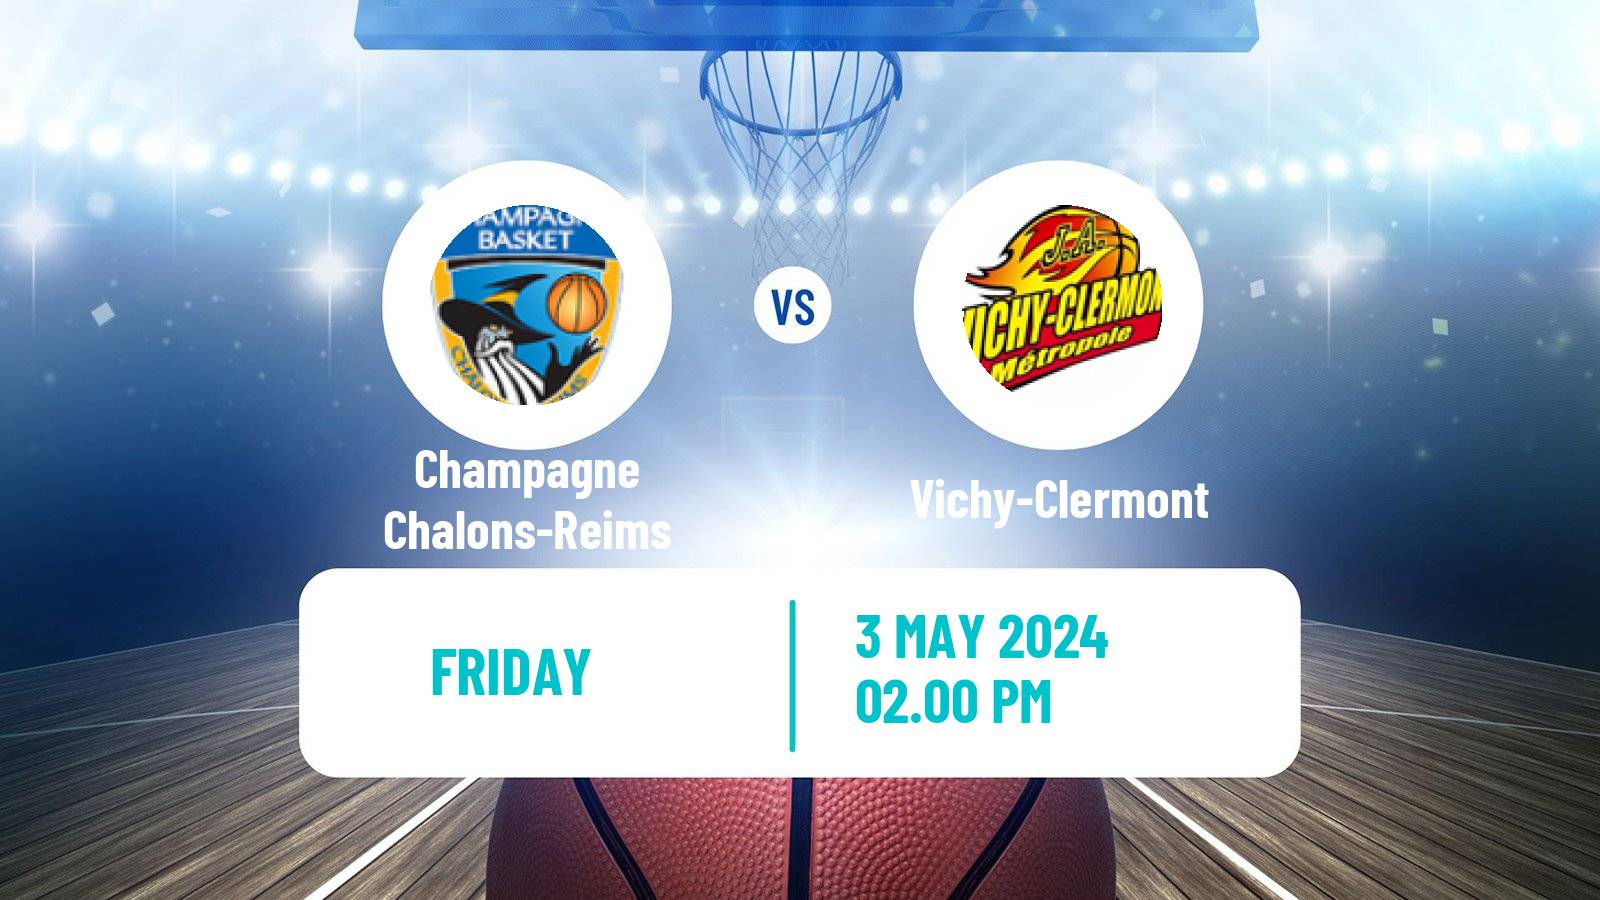 Basketball French LNB Pro B Champagne Chalons-Reims - Vichy-Clermont